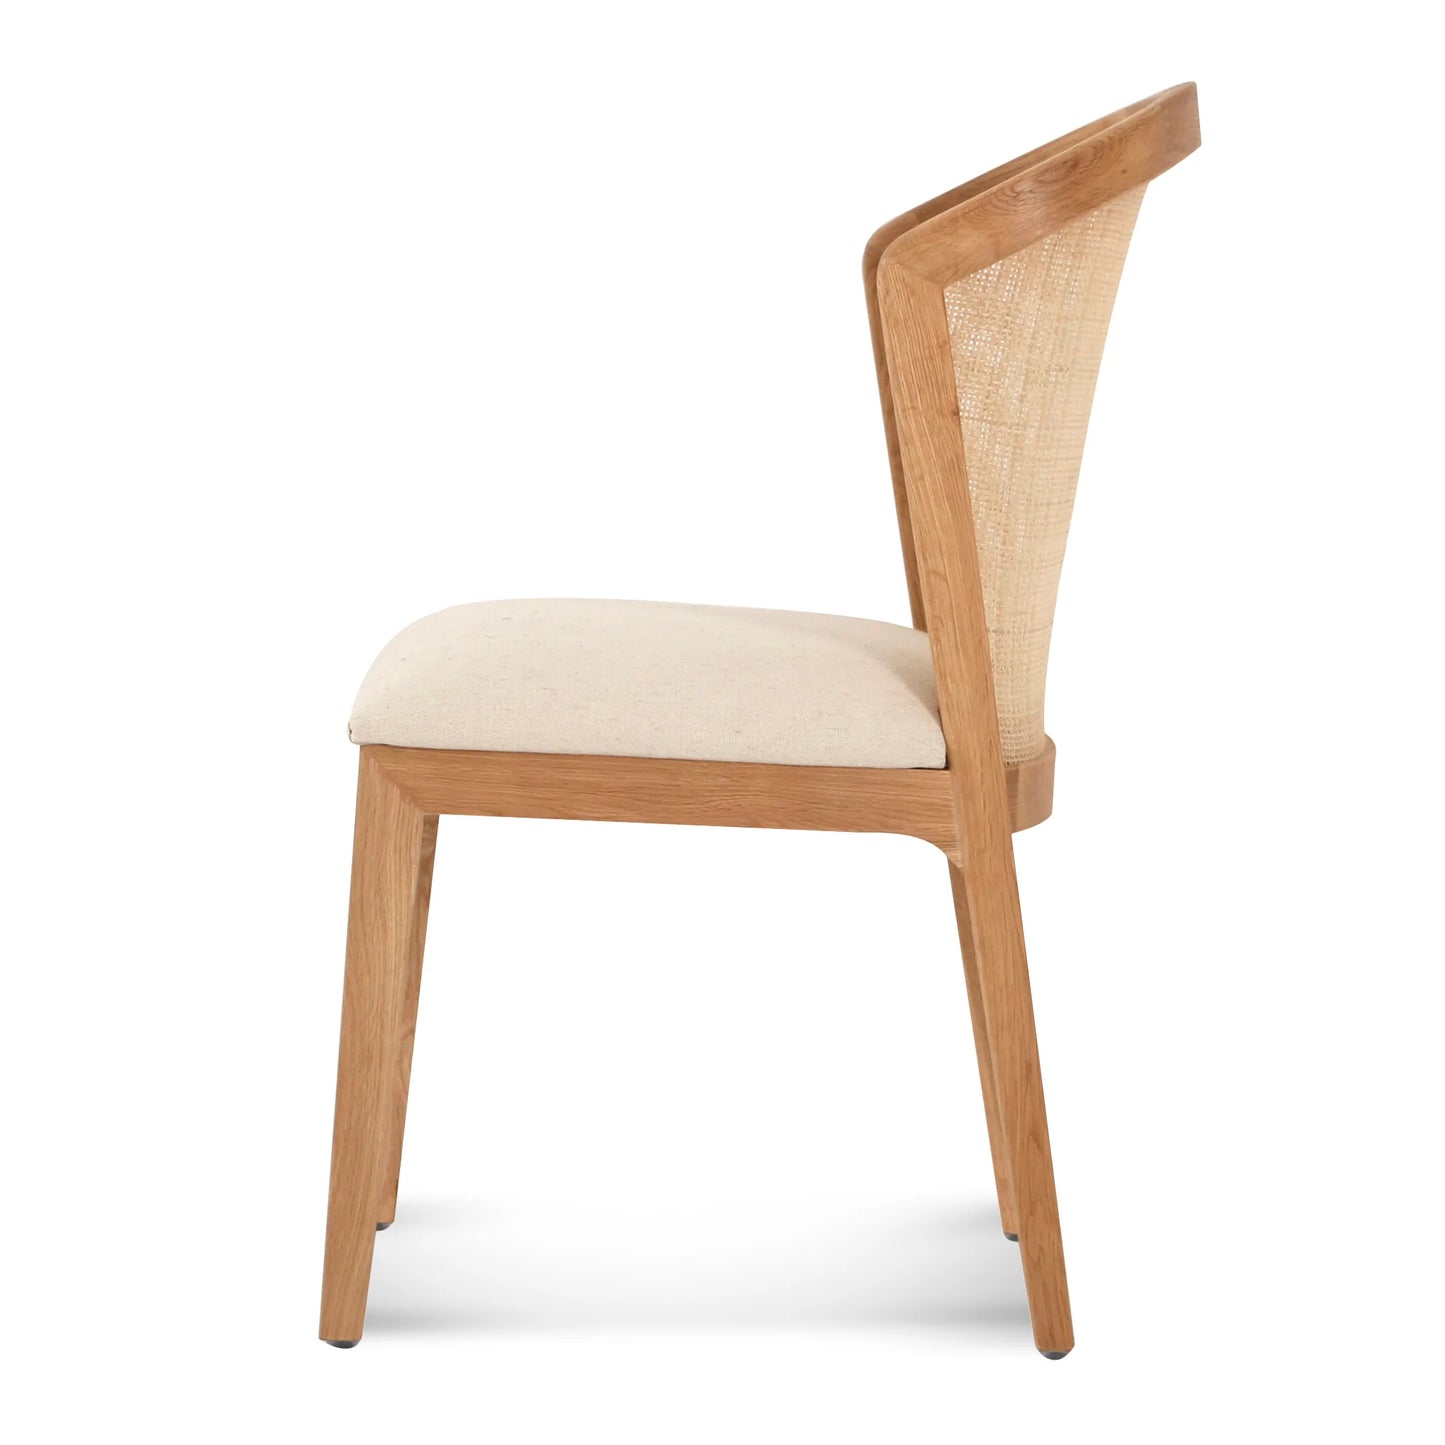 Angie Fabric Dining Chair - Light Beige